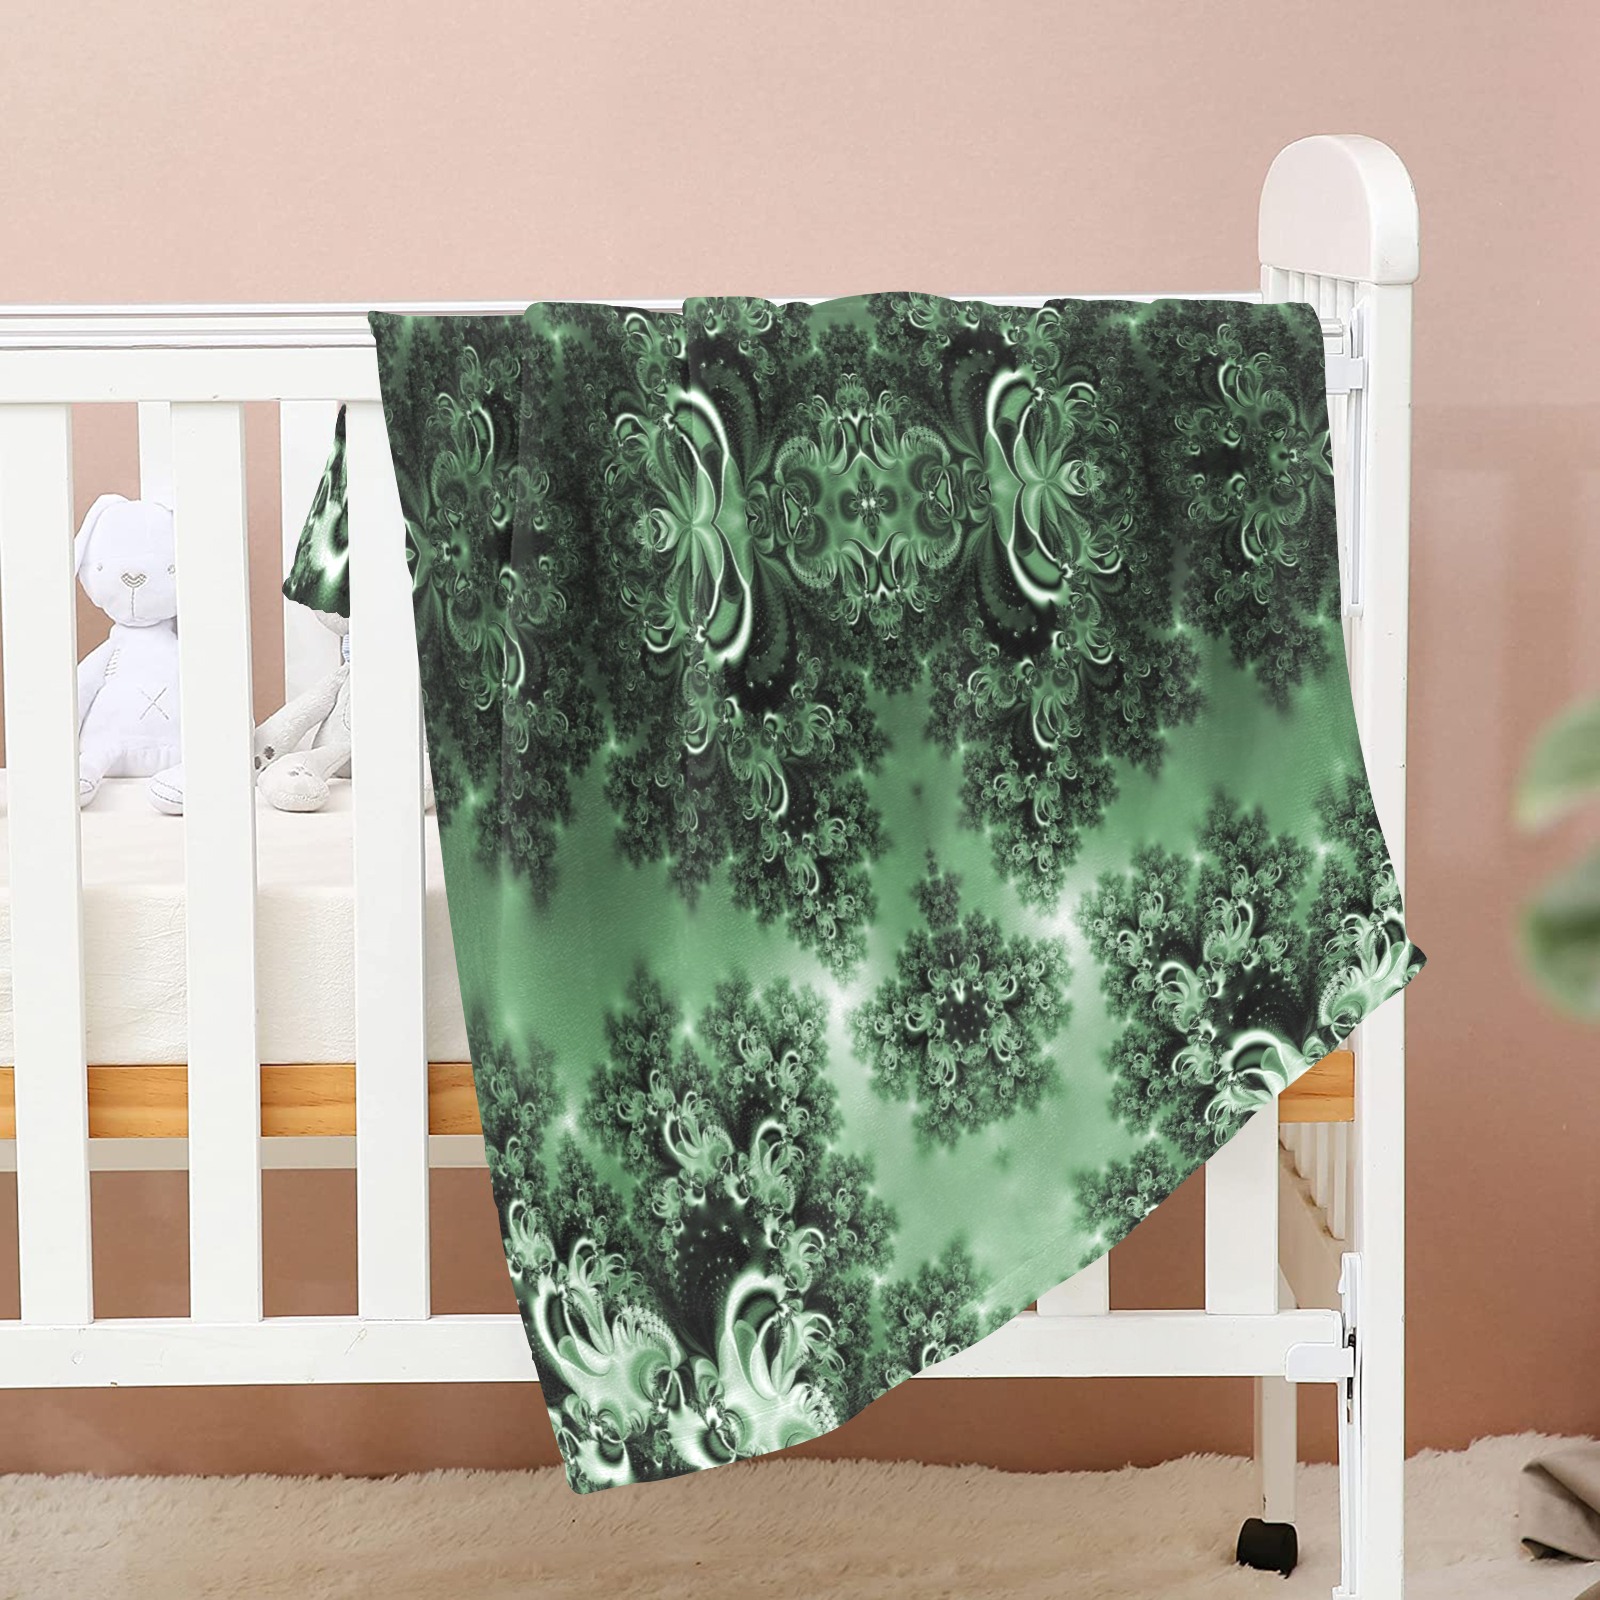 Deep in the Forest Frost Fractal Baby Blanket 40"x50"